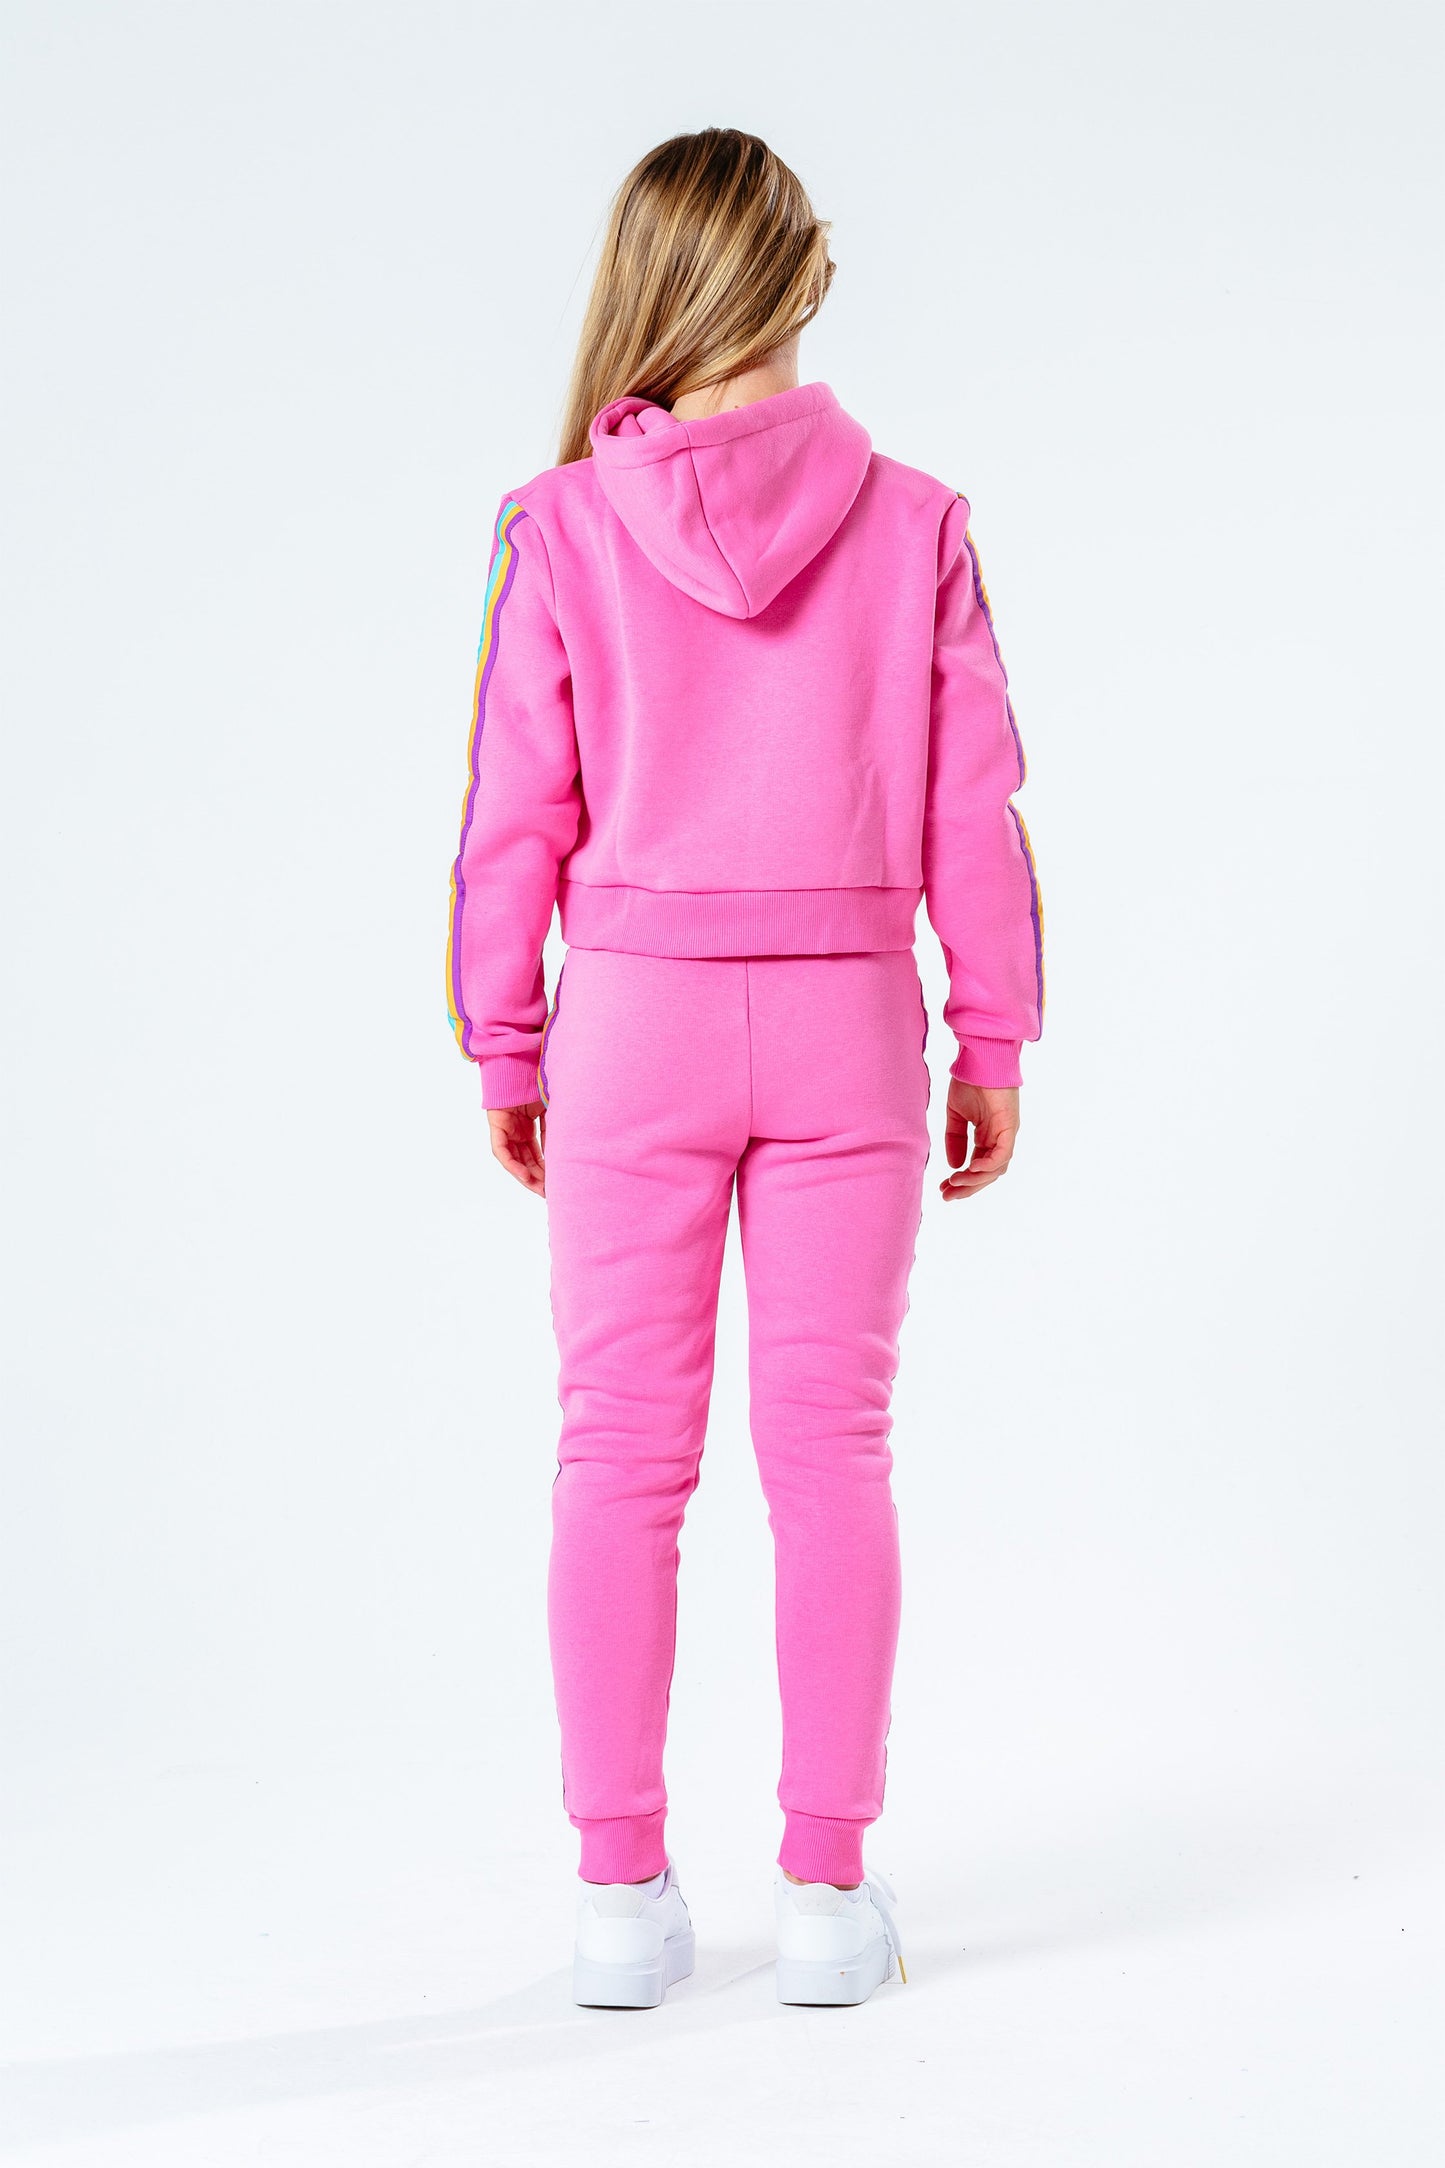 Hype Pink Rainbow Taped Kids Joggers